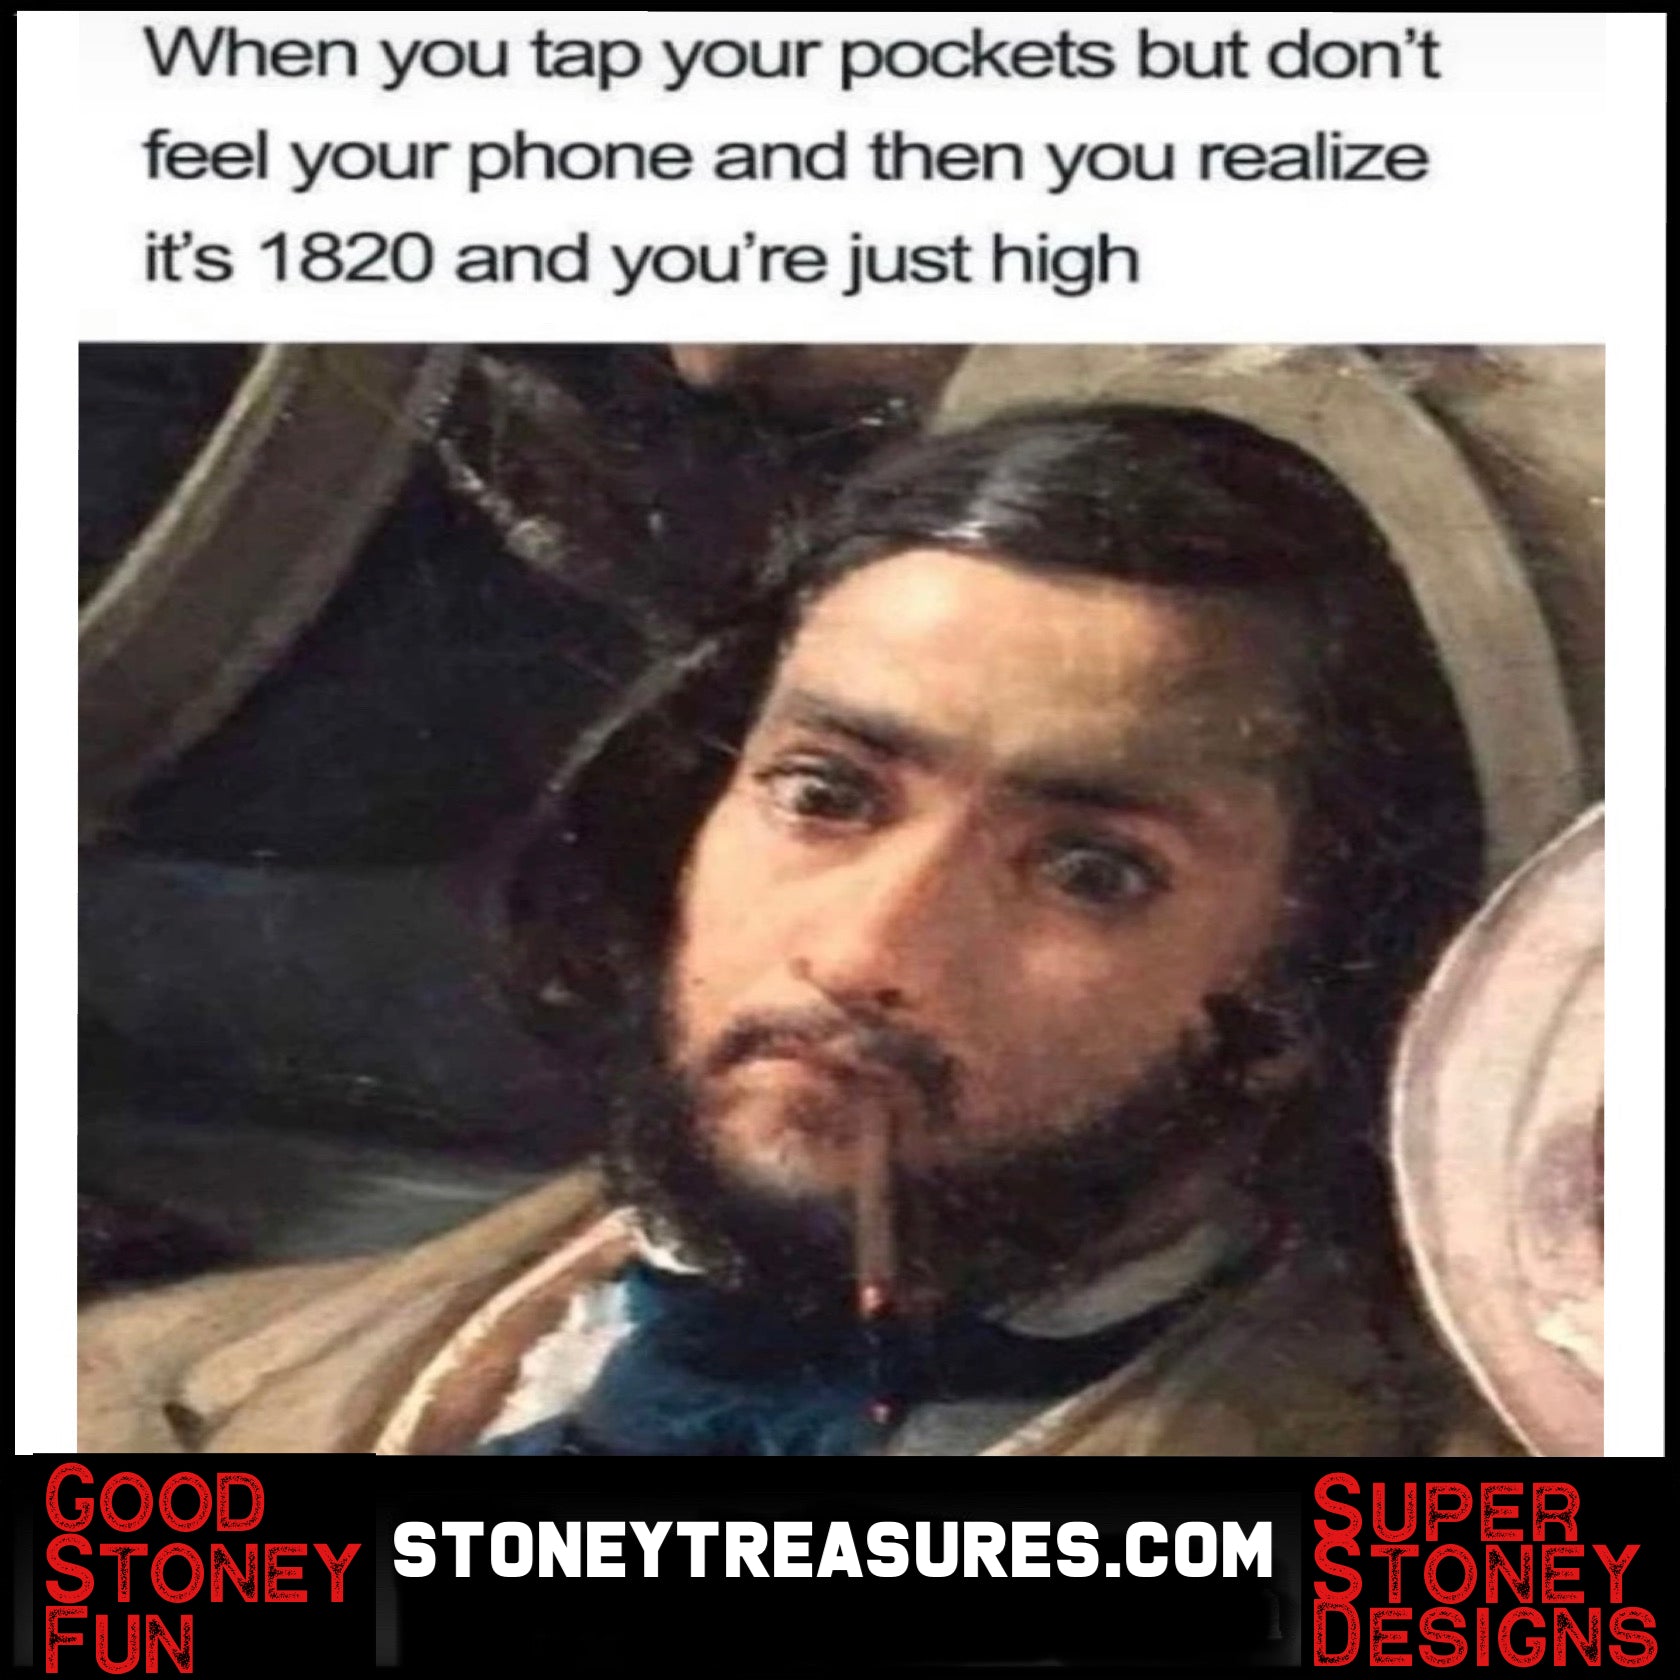 Super Stoney designs with our brand of humor @ StoneyTreasures.com